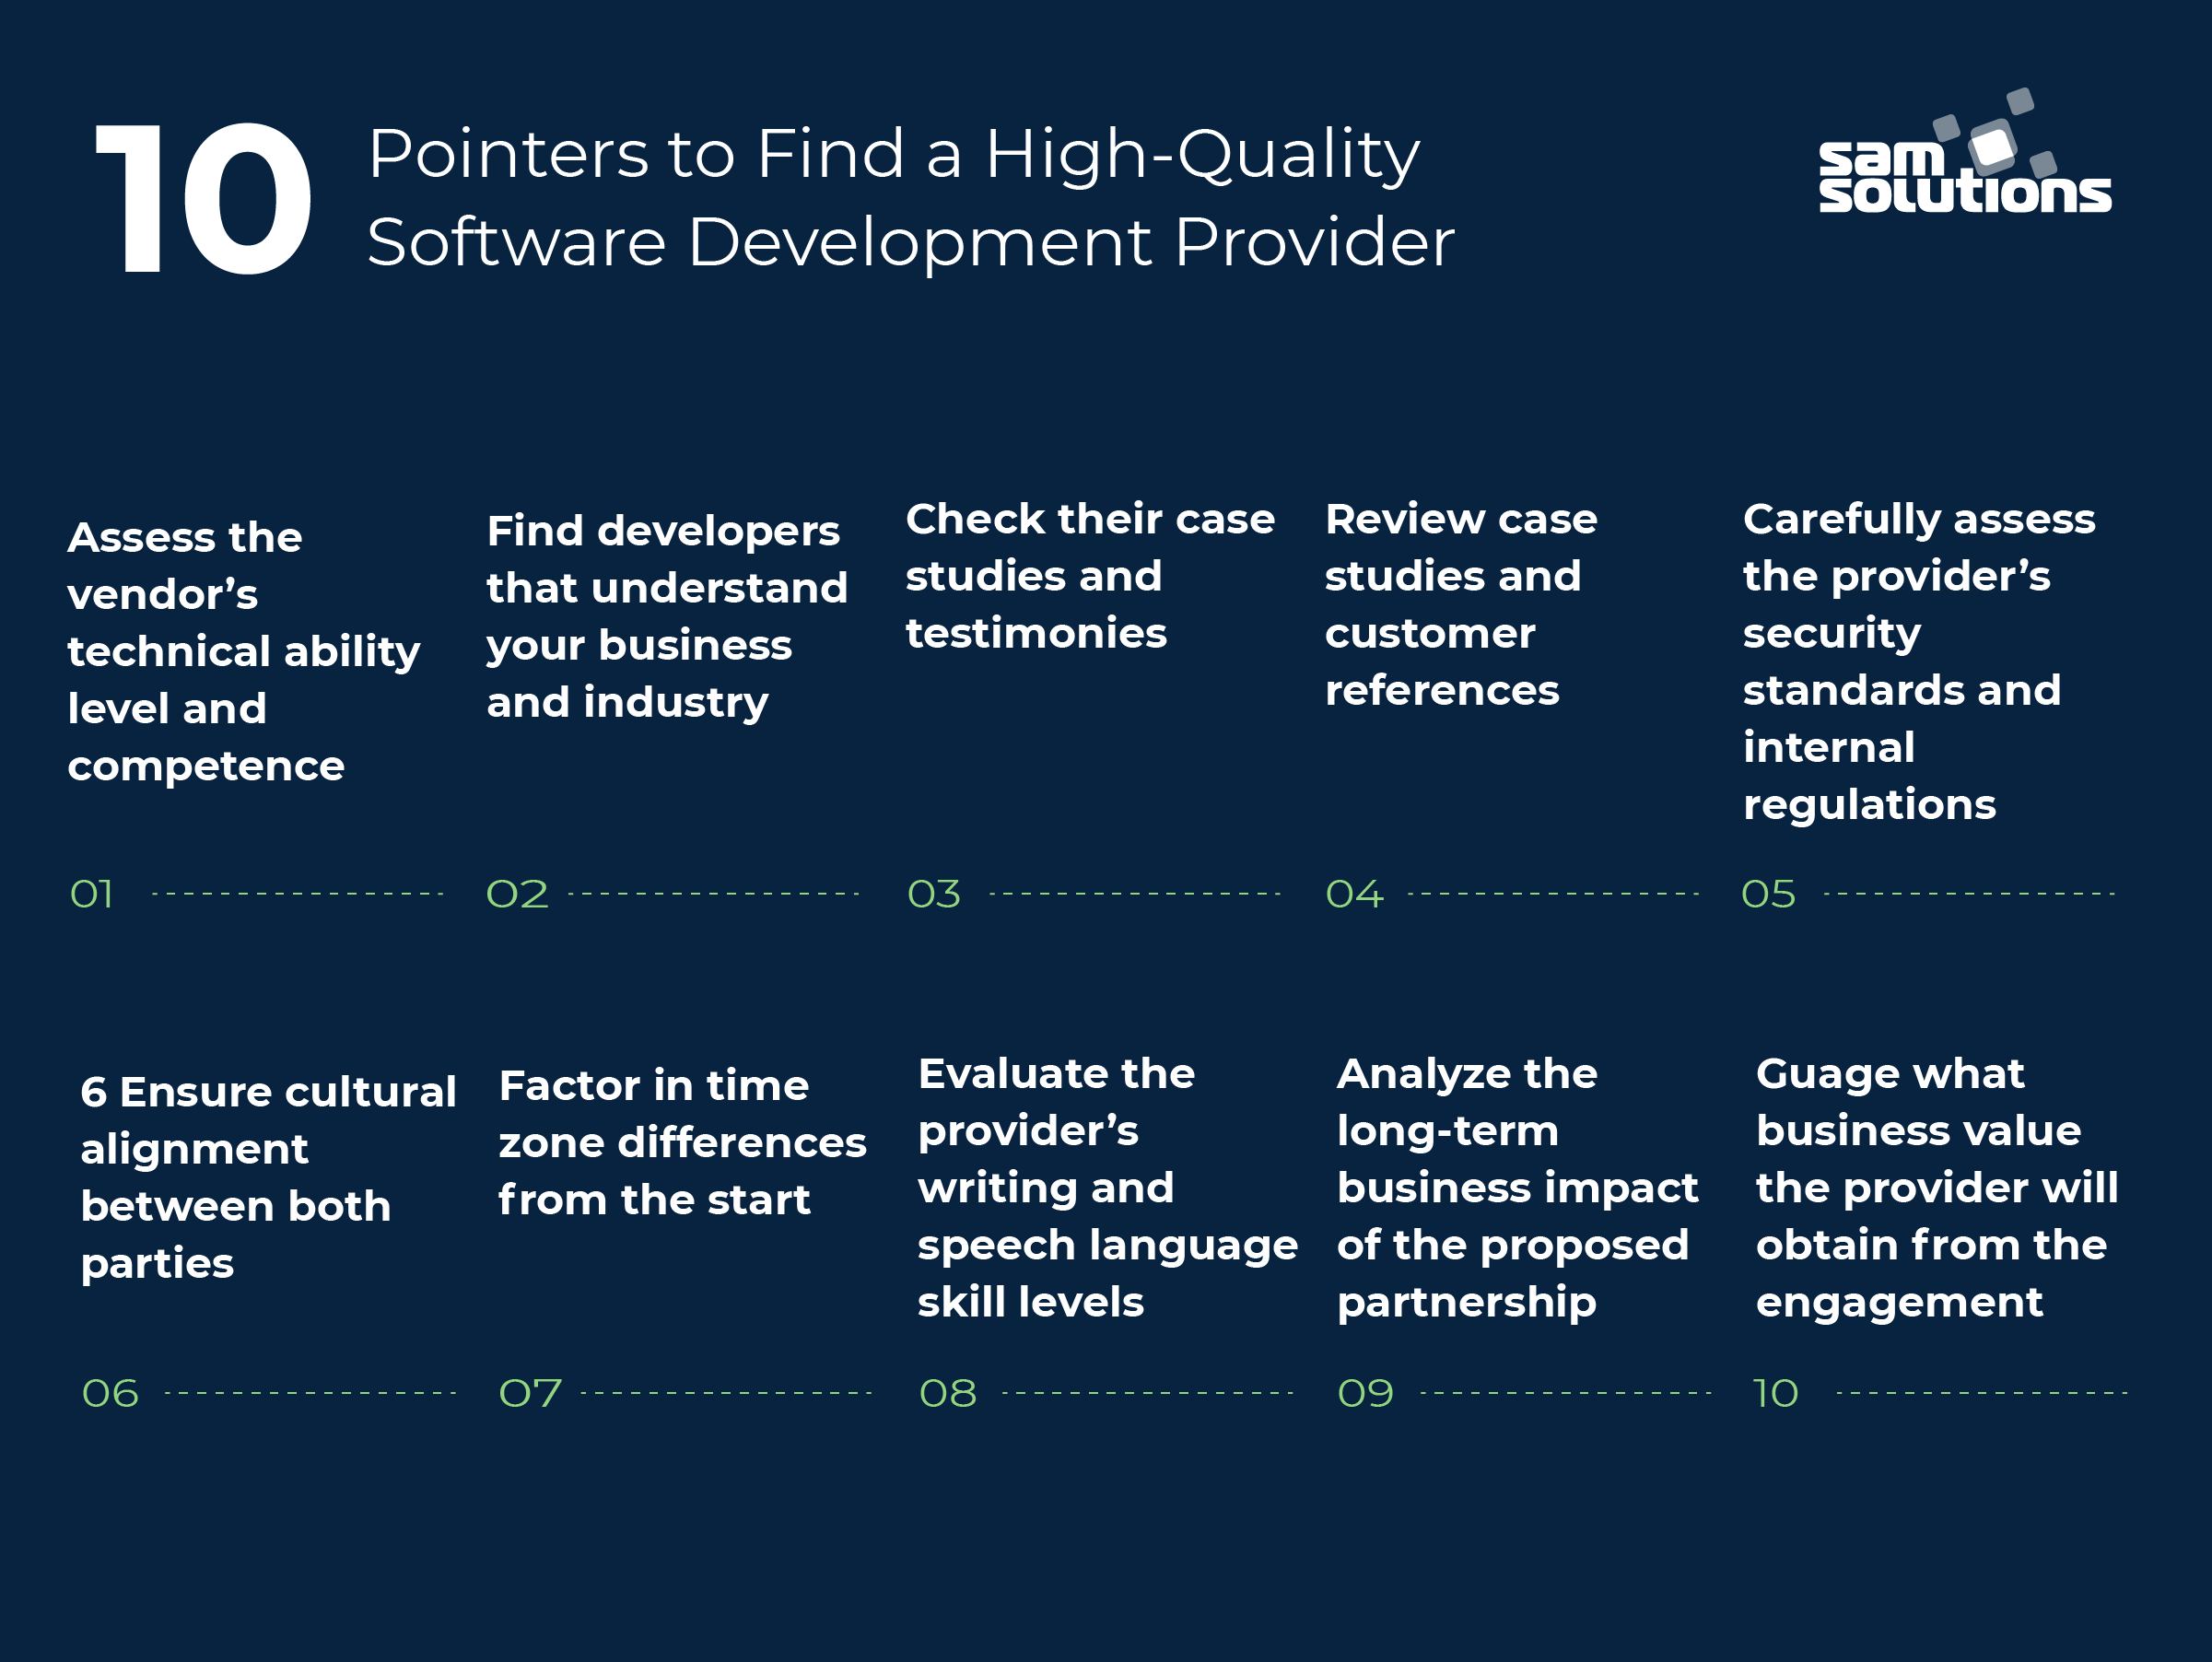 10 Pointers to Find a High-Quality Software Development Provider